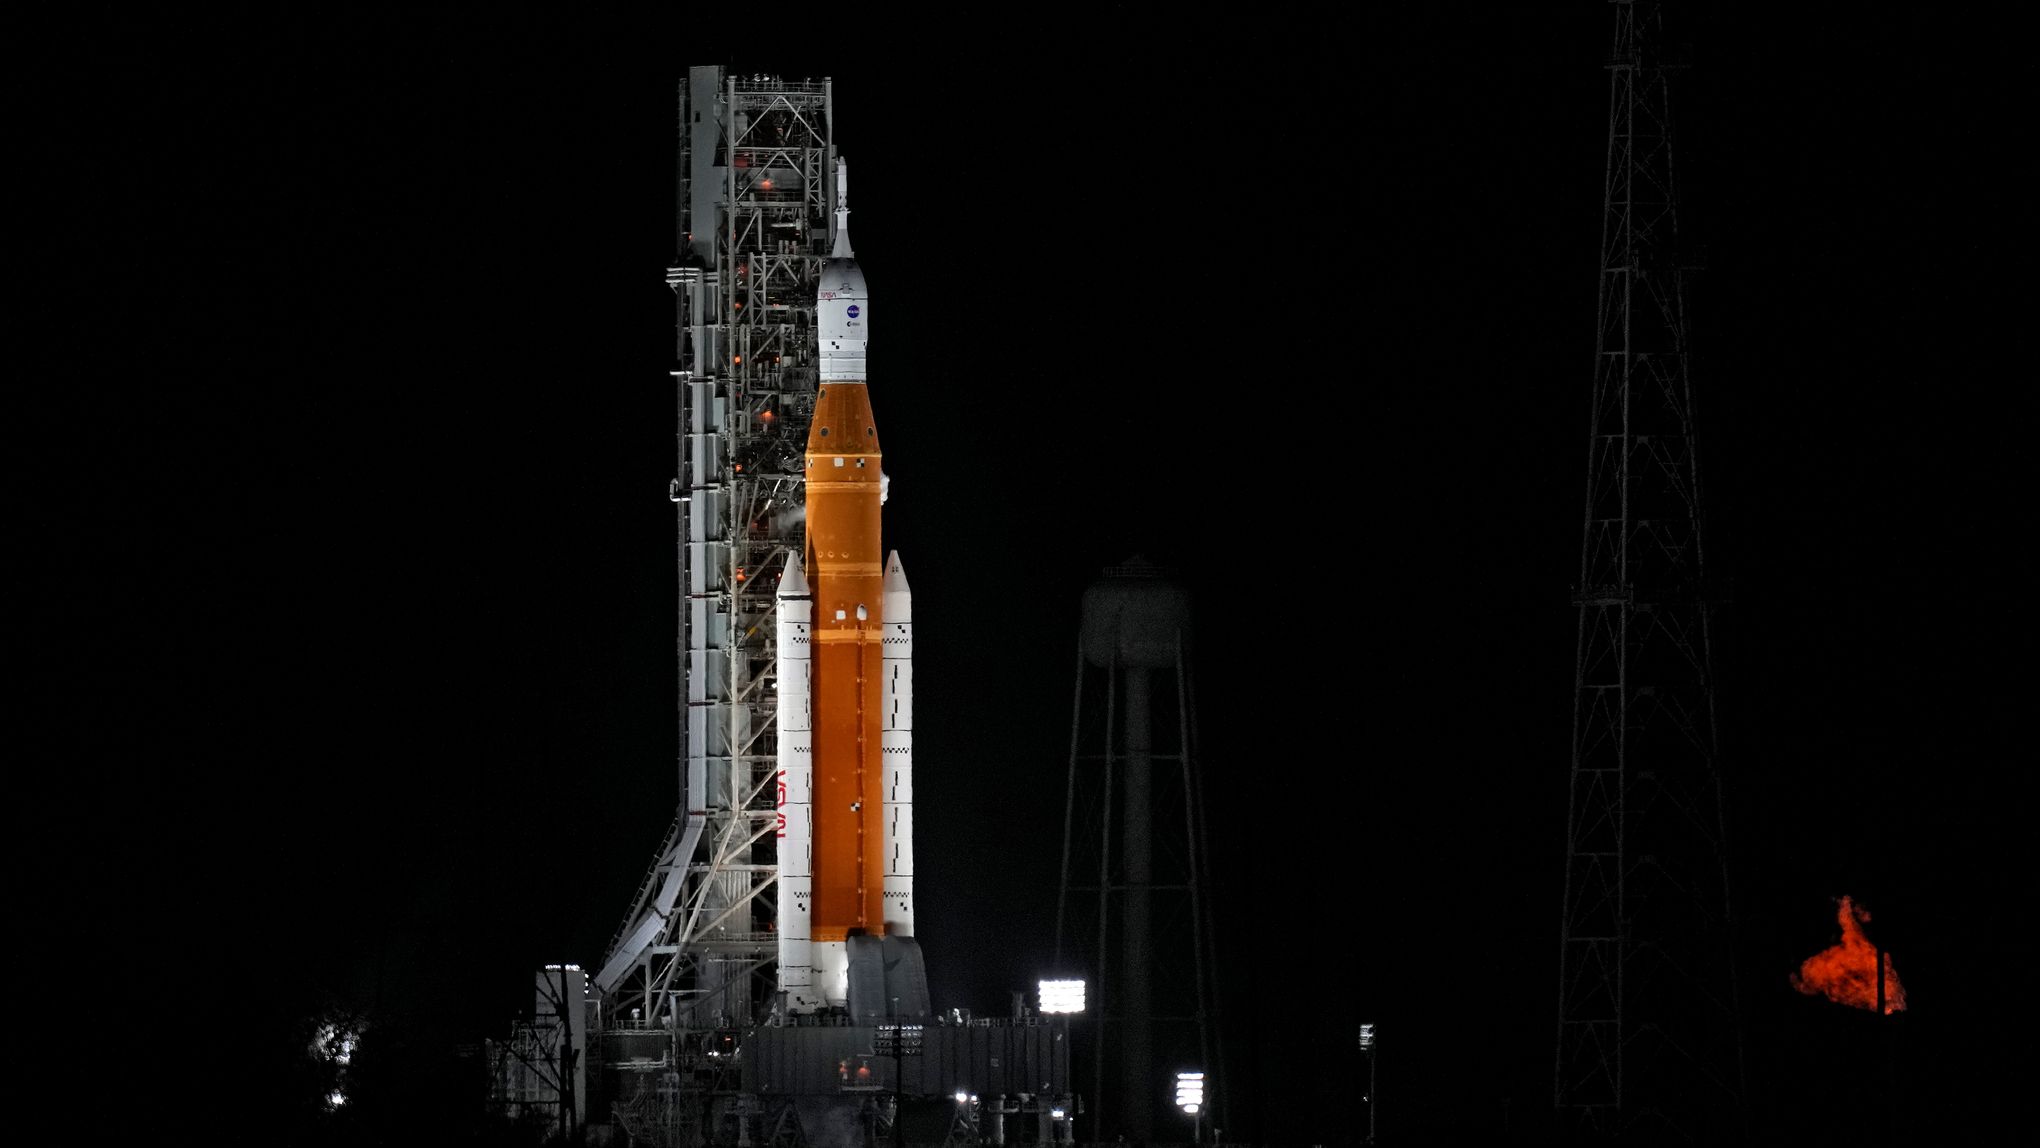 NASA fixes new leak, resumes fueling moon rocket for launch